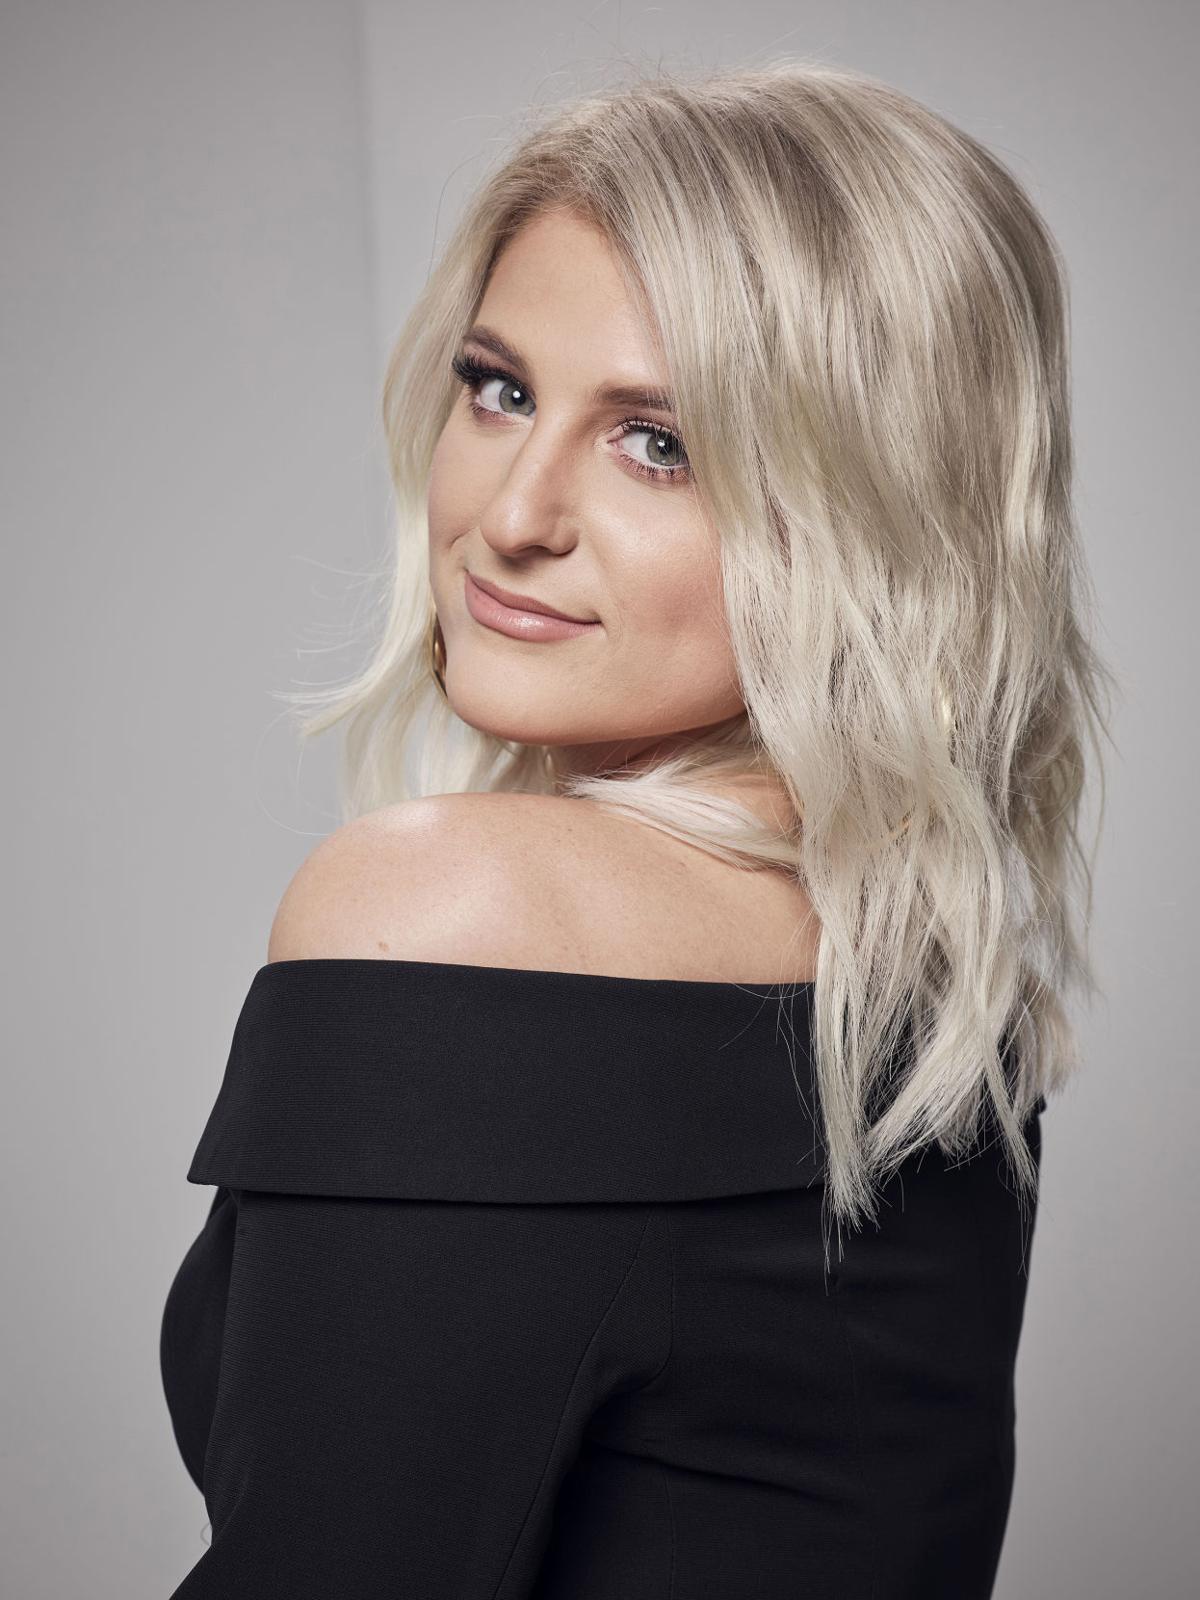 Meghan Trainor says it's all about the songs | Music | siouxcityjournal.com1200 x 1600